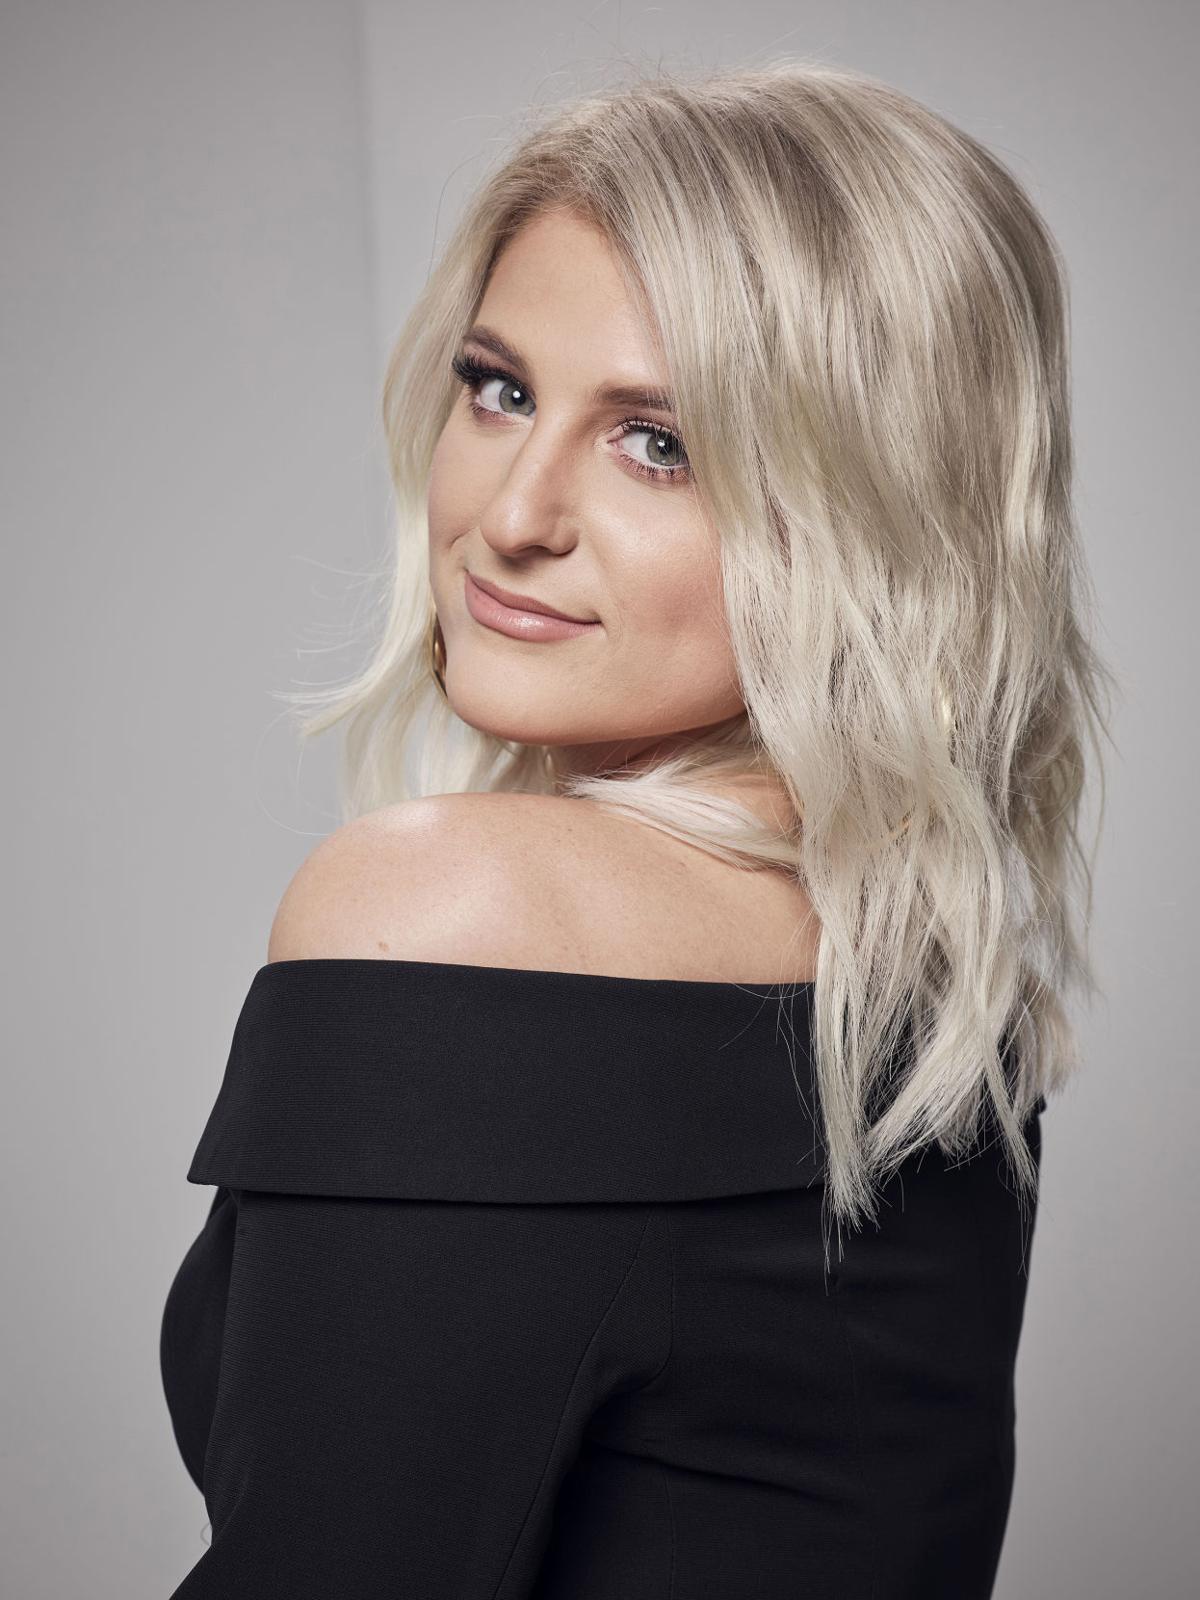 Meghan Trainor says it's all about the songs | Music | siouxcityjournal.com1200 x 1600